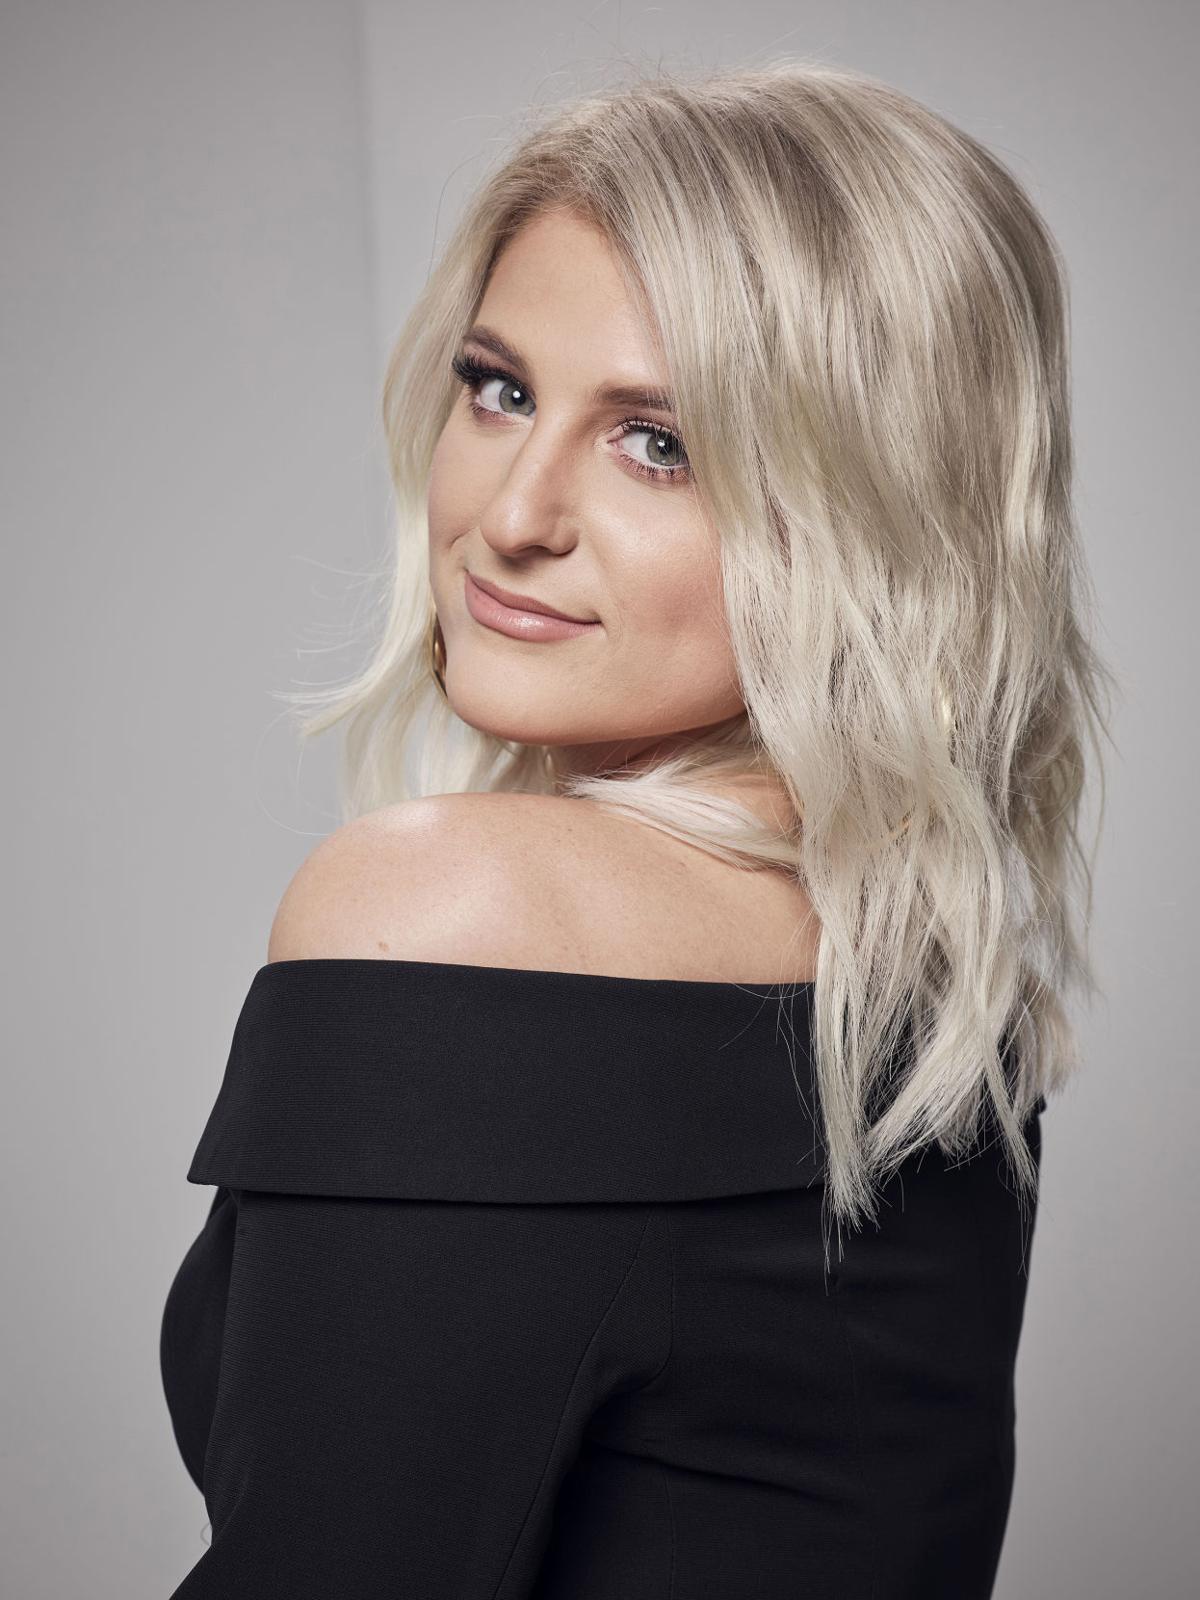 Meghan Trainor says it's all about the songs | Music | siouxcityjournal.com1200 x 1600